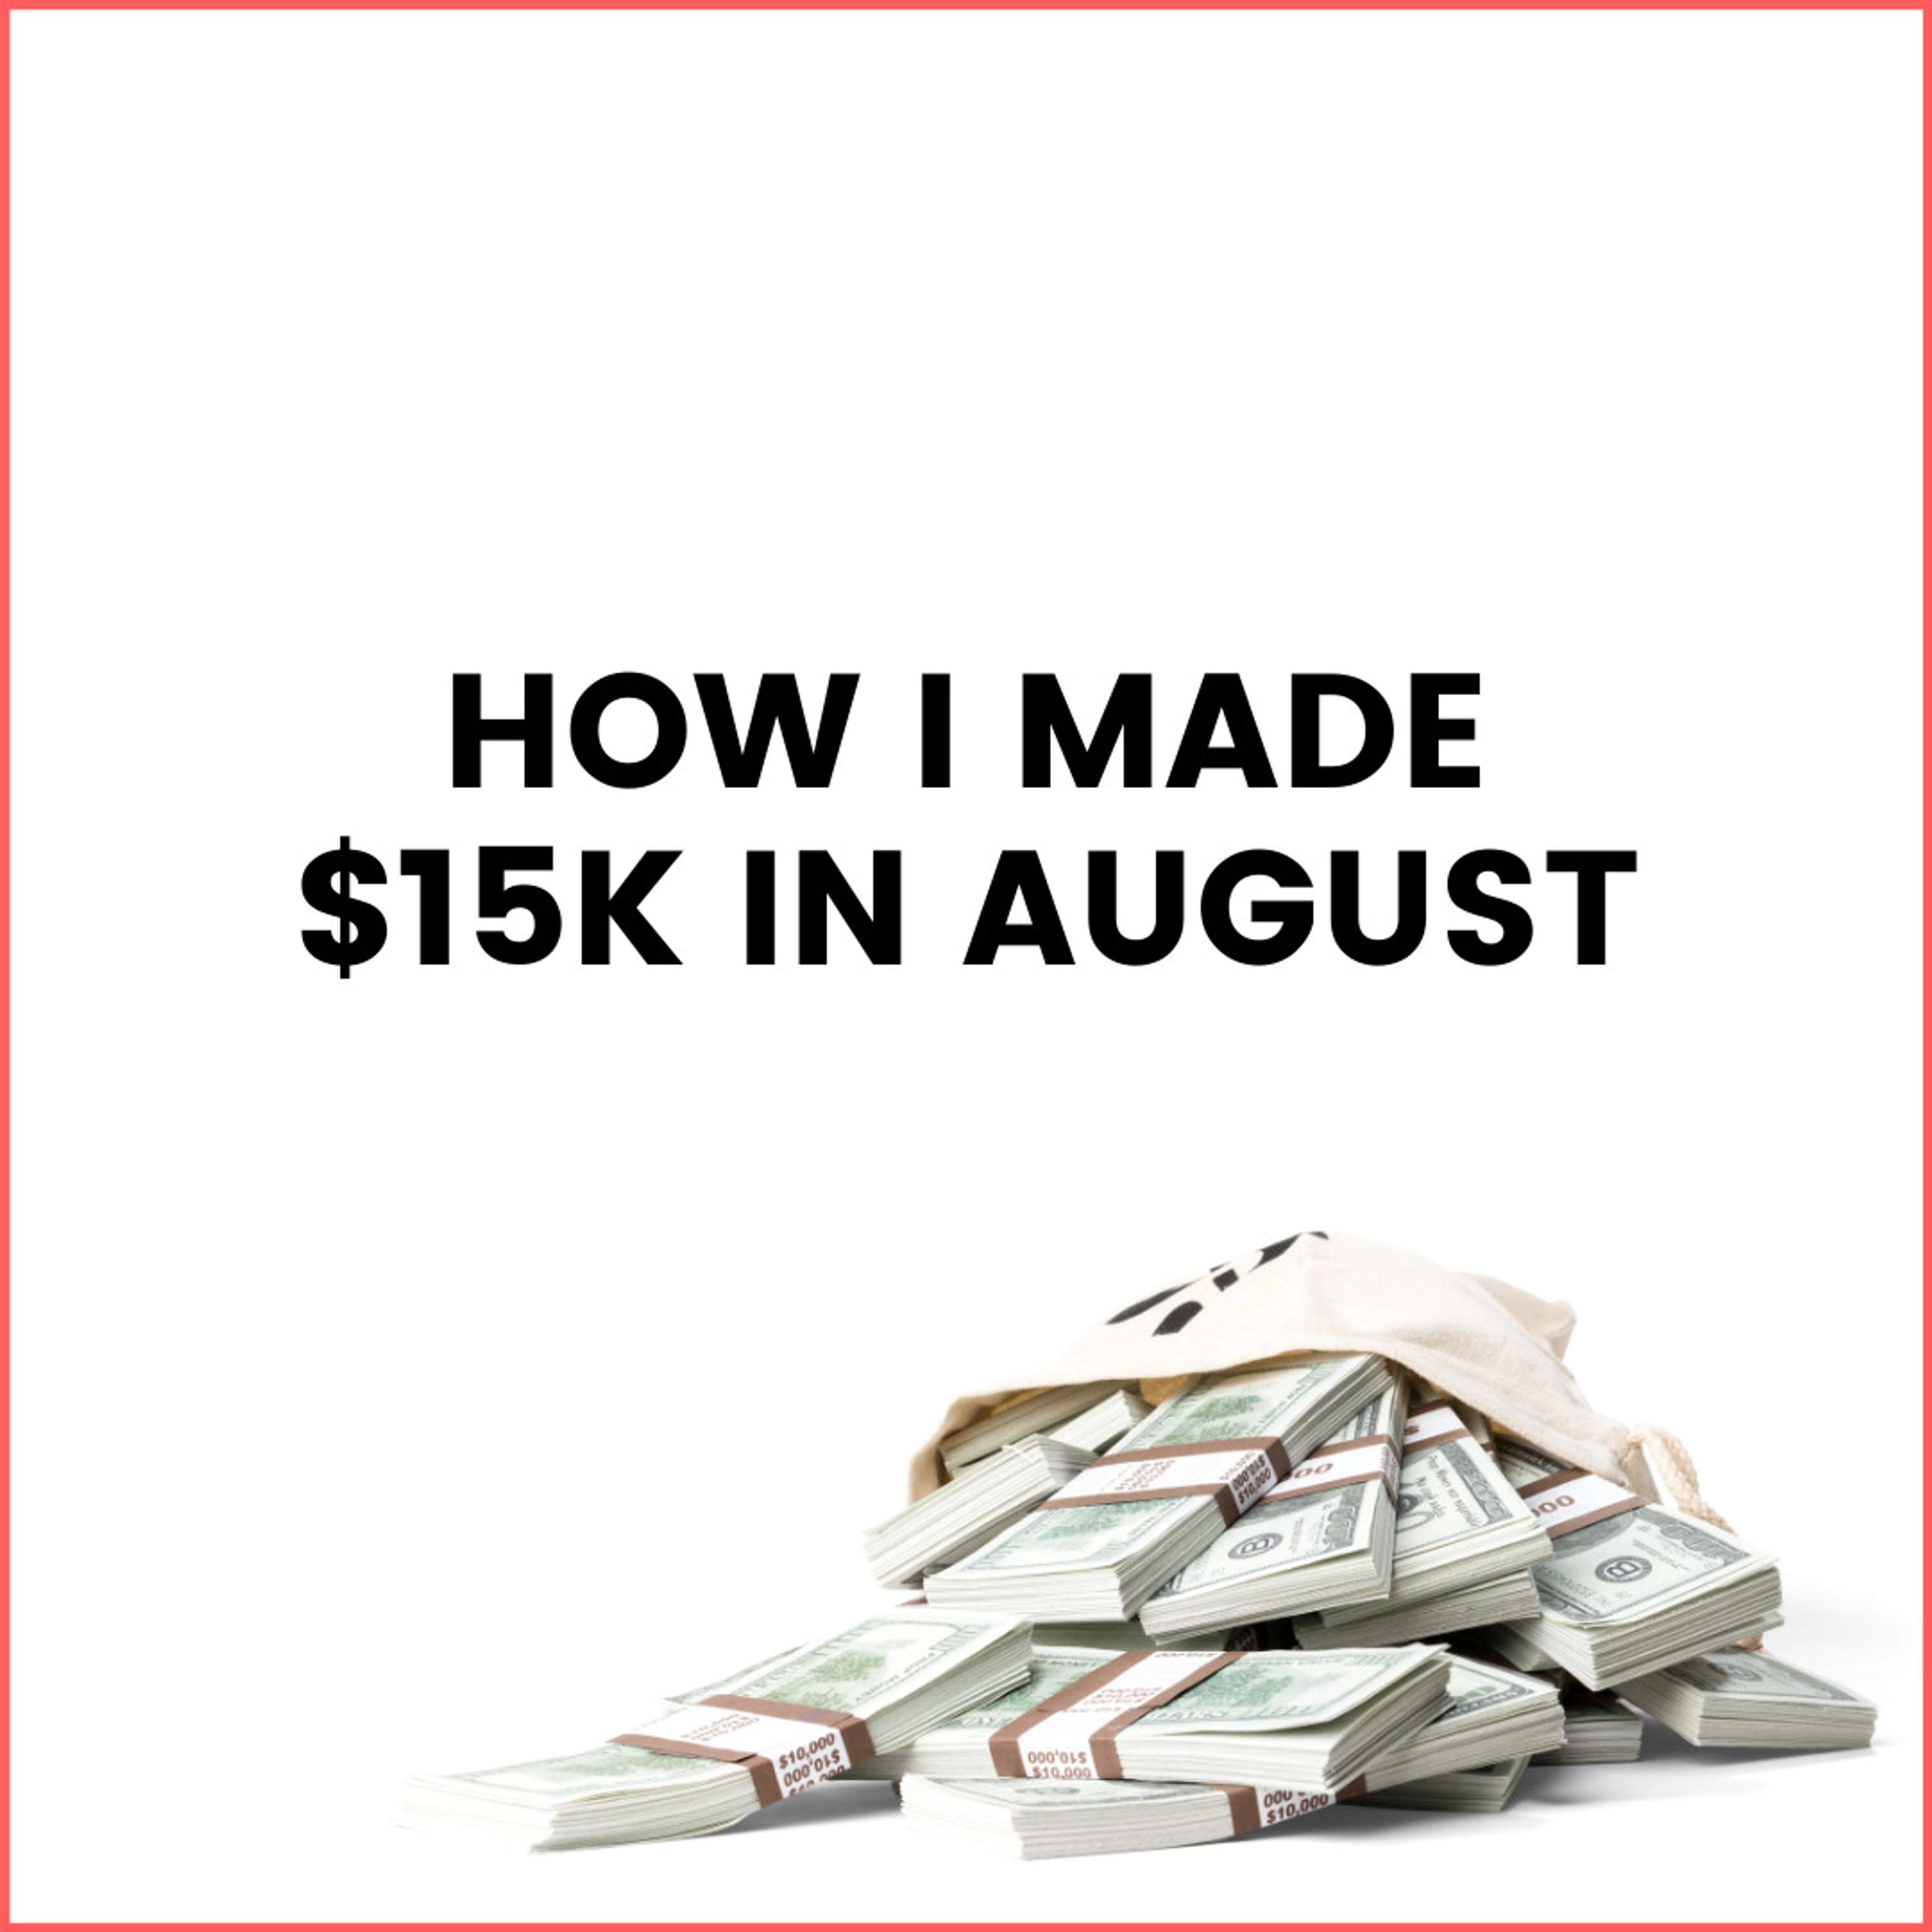 37. How I Made $15,238.69 in August